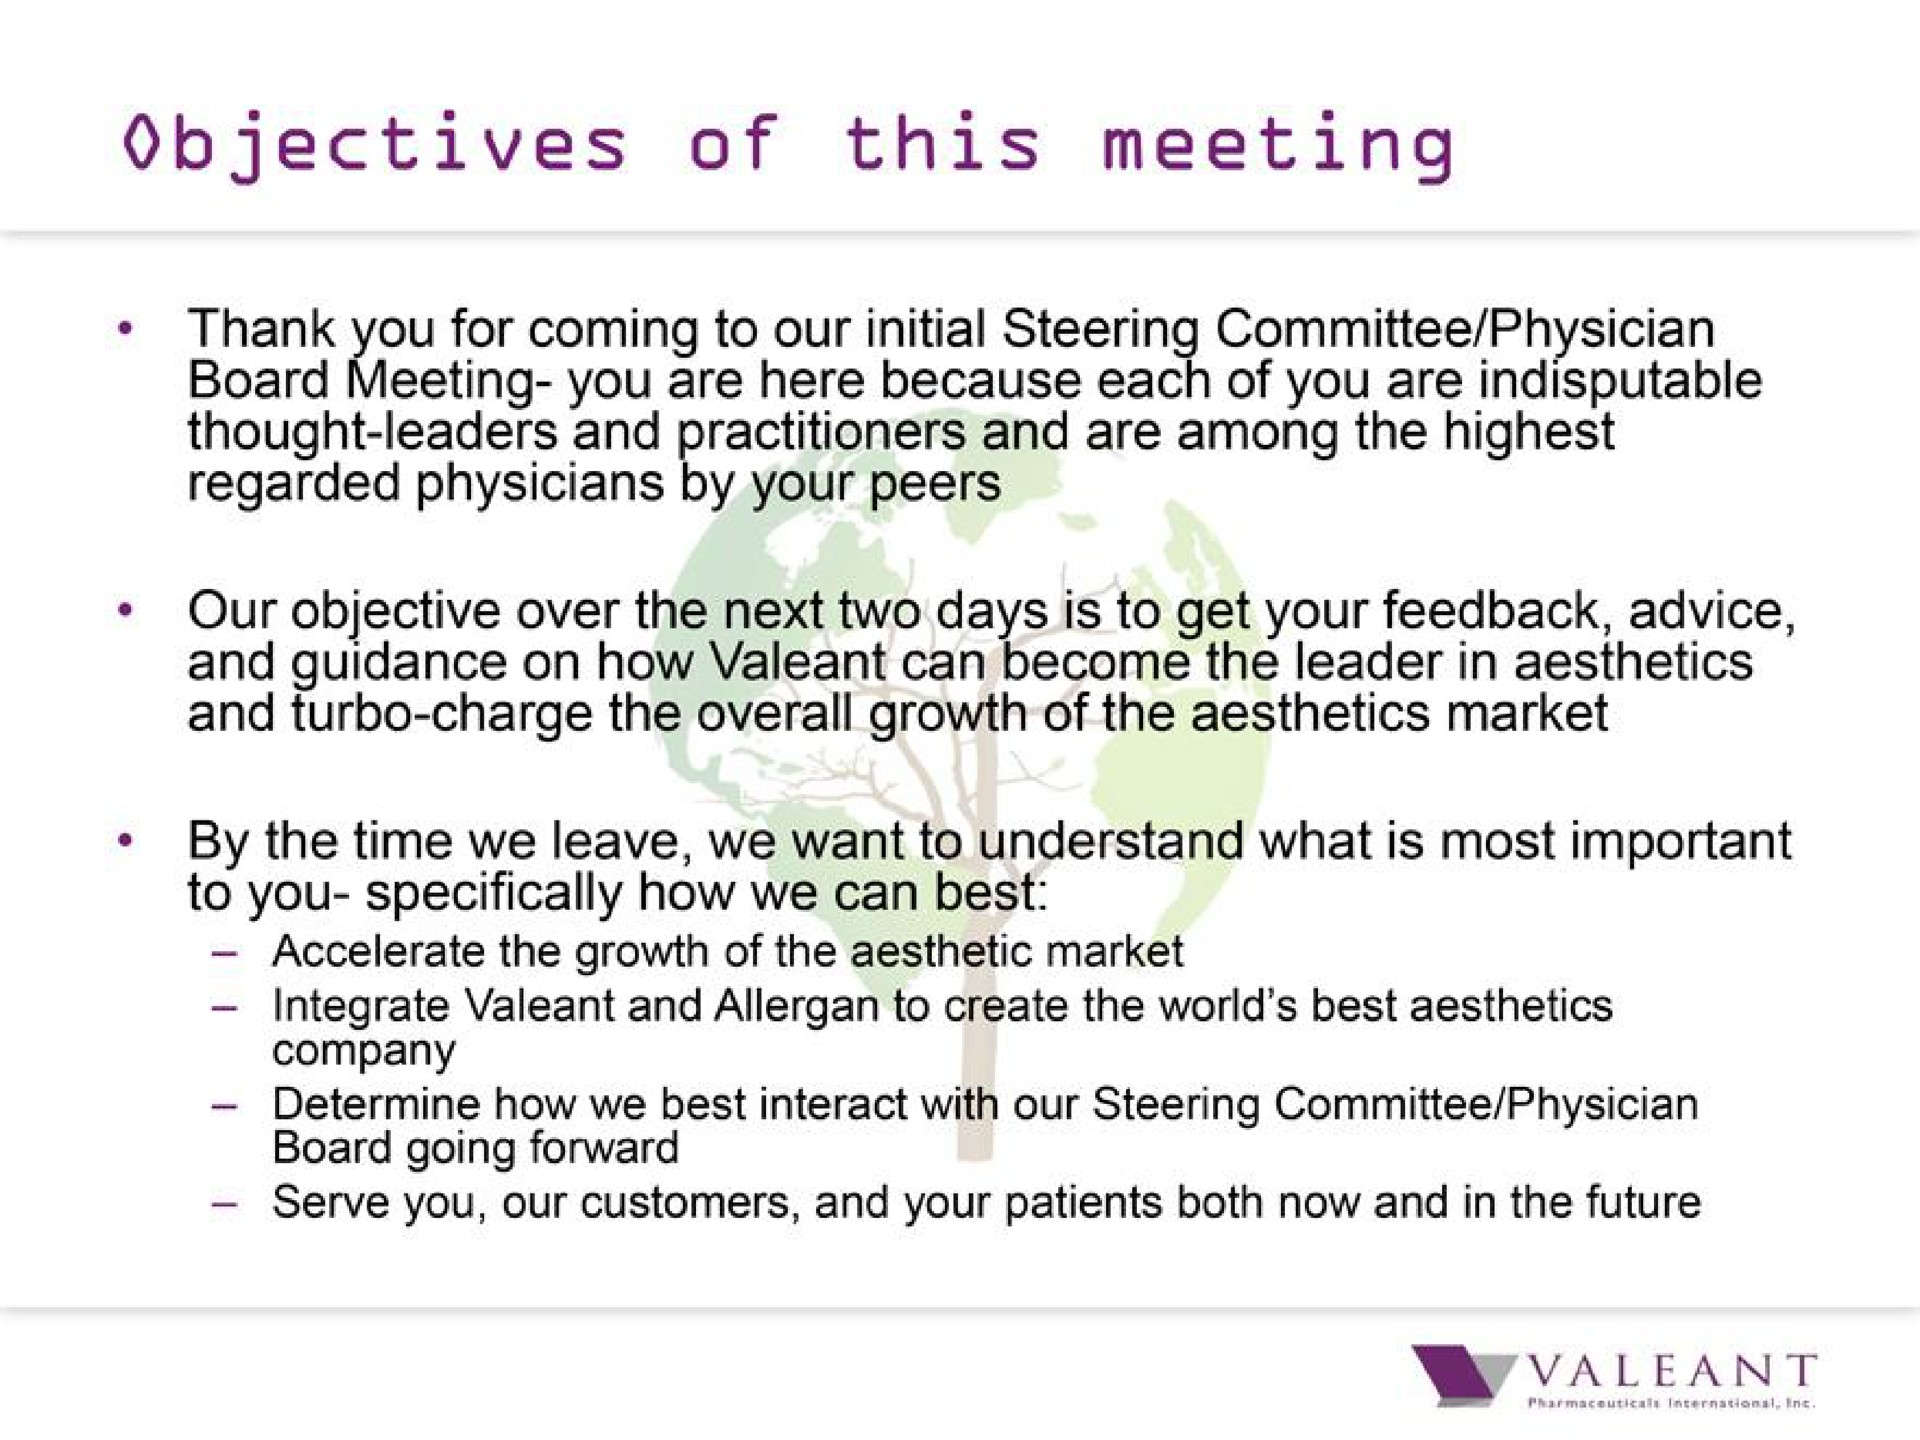 objectives of this meeting | Bausch Health Companies